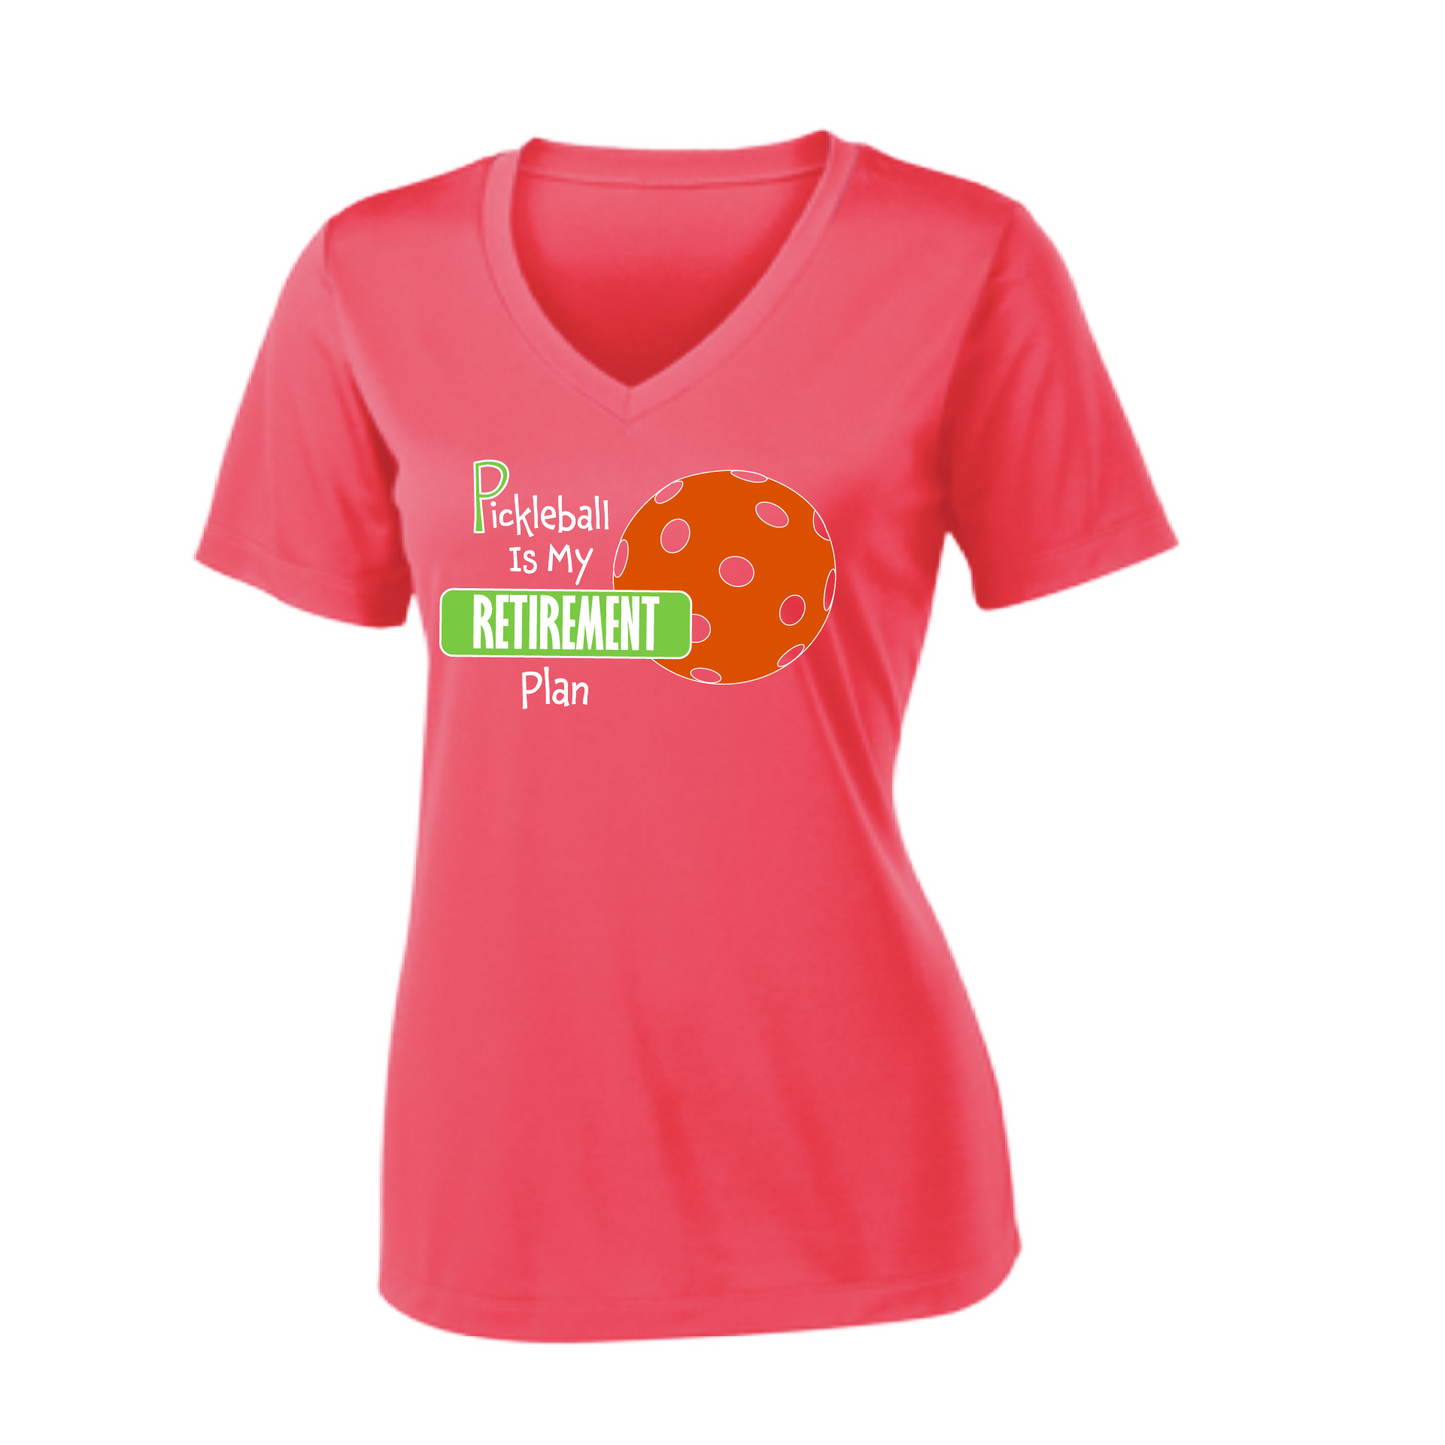 Pickleball Design: Pickleball is my Retirement plan  Women's Style: Short-Sleeve V-Neck Tank  Turn up the volume in this Women's shirt with its perfect mix of softness and attitude. Material is ultra-comfortable with moisture wicking properties and tri-blend softness. PosiCharge technology locks in color. Highly breathable and lightweight.